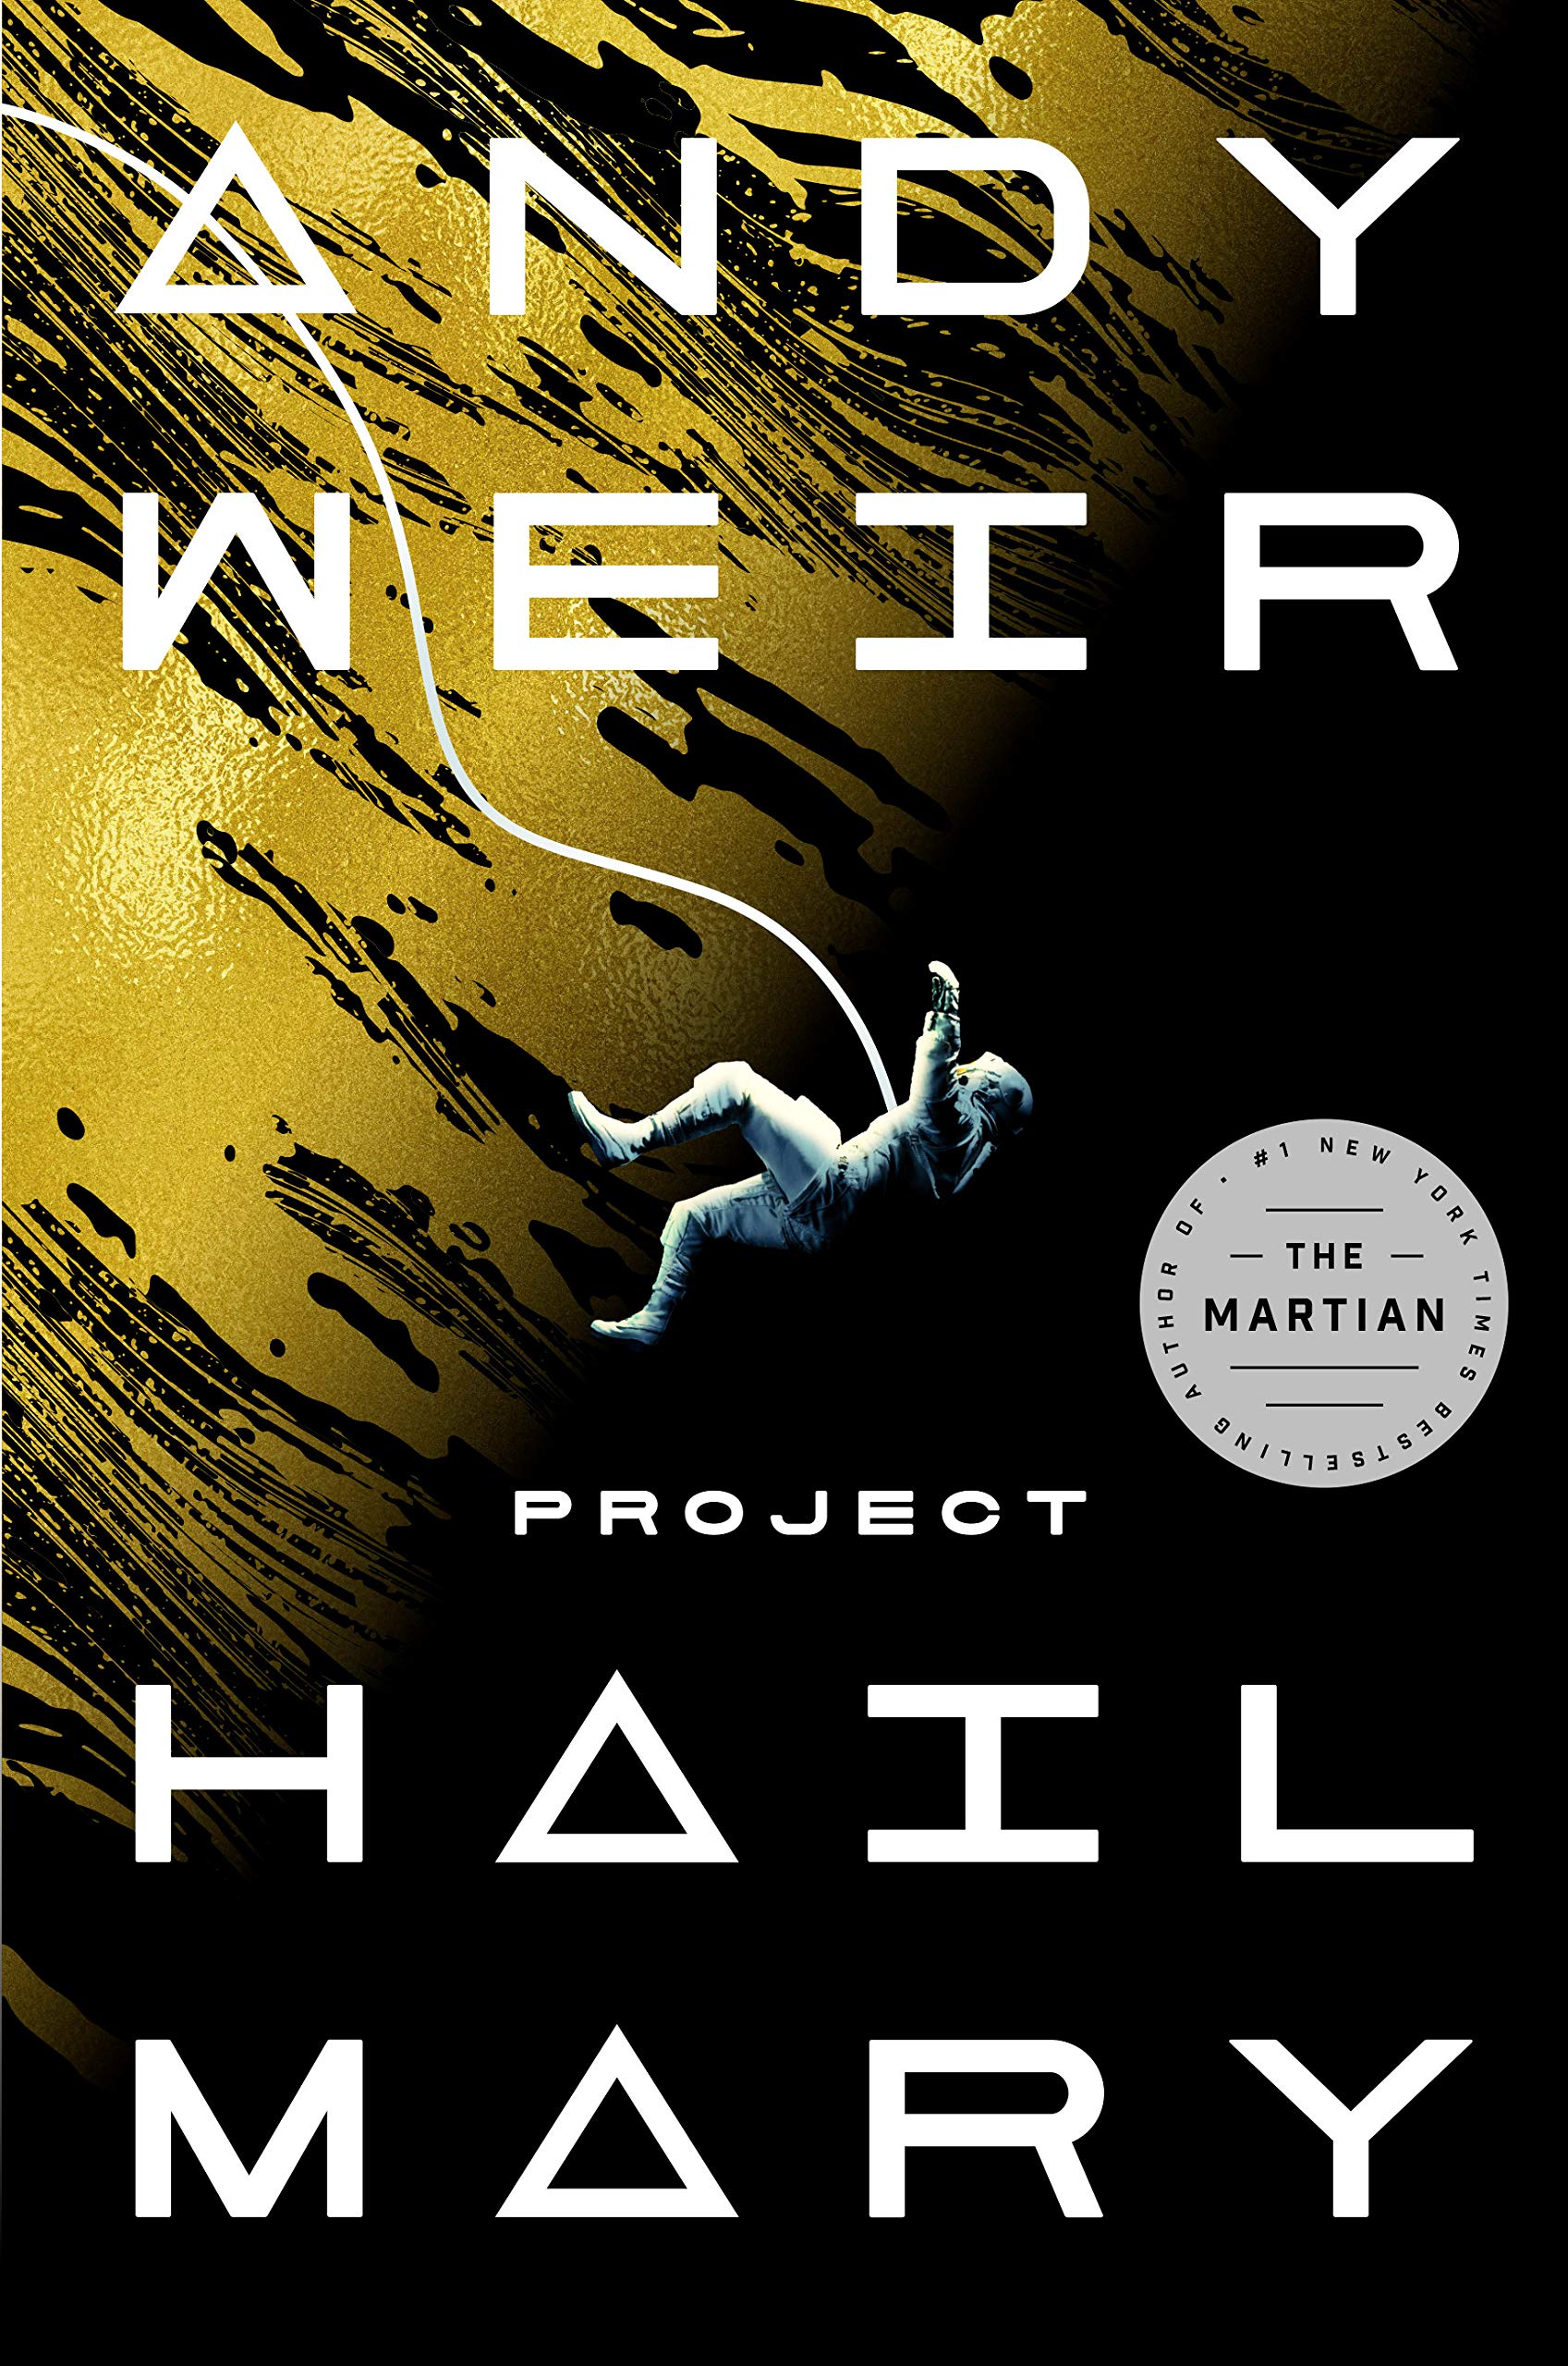 Books for kids who like video games: Project Hail Mary by Andy Weir